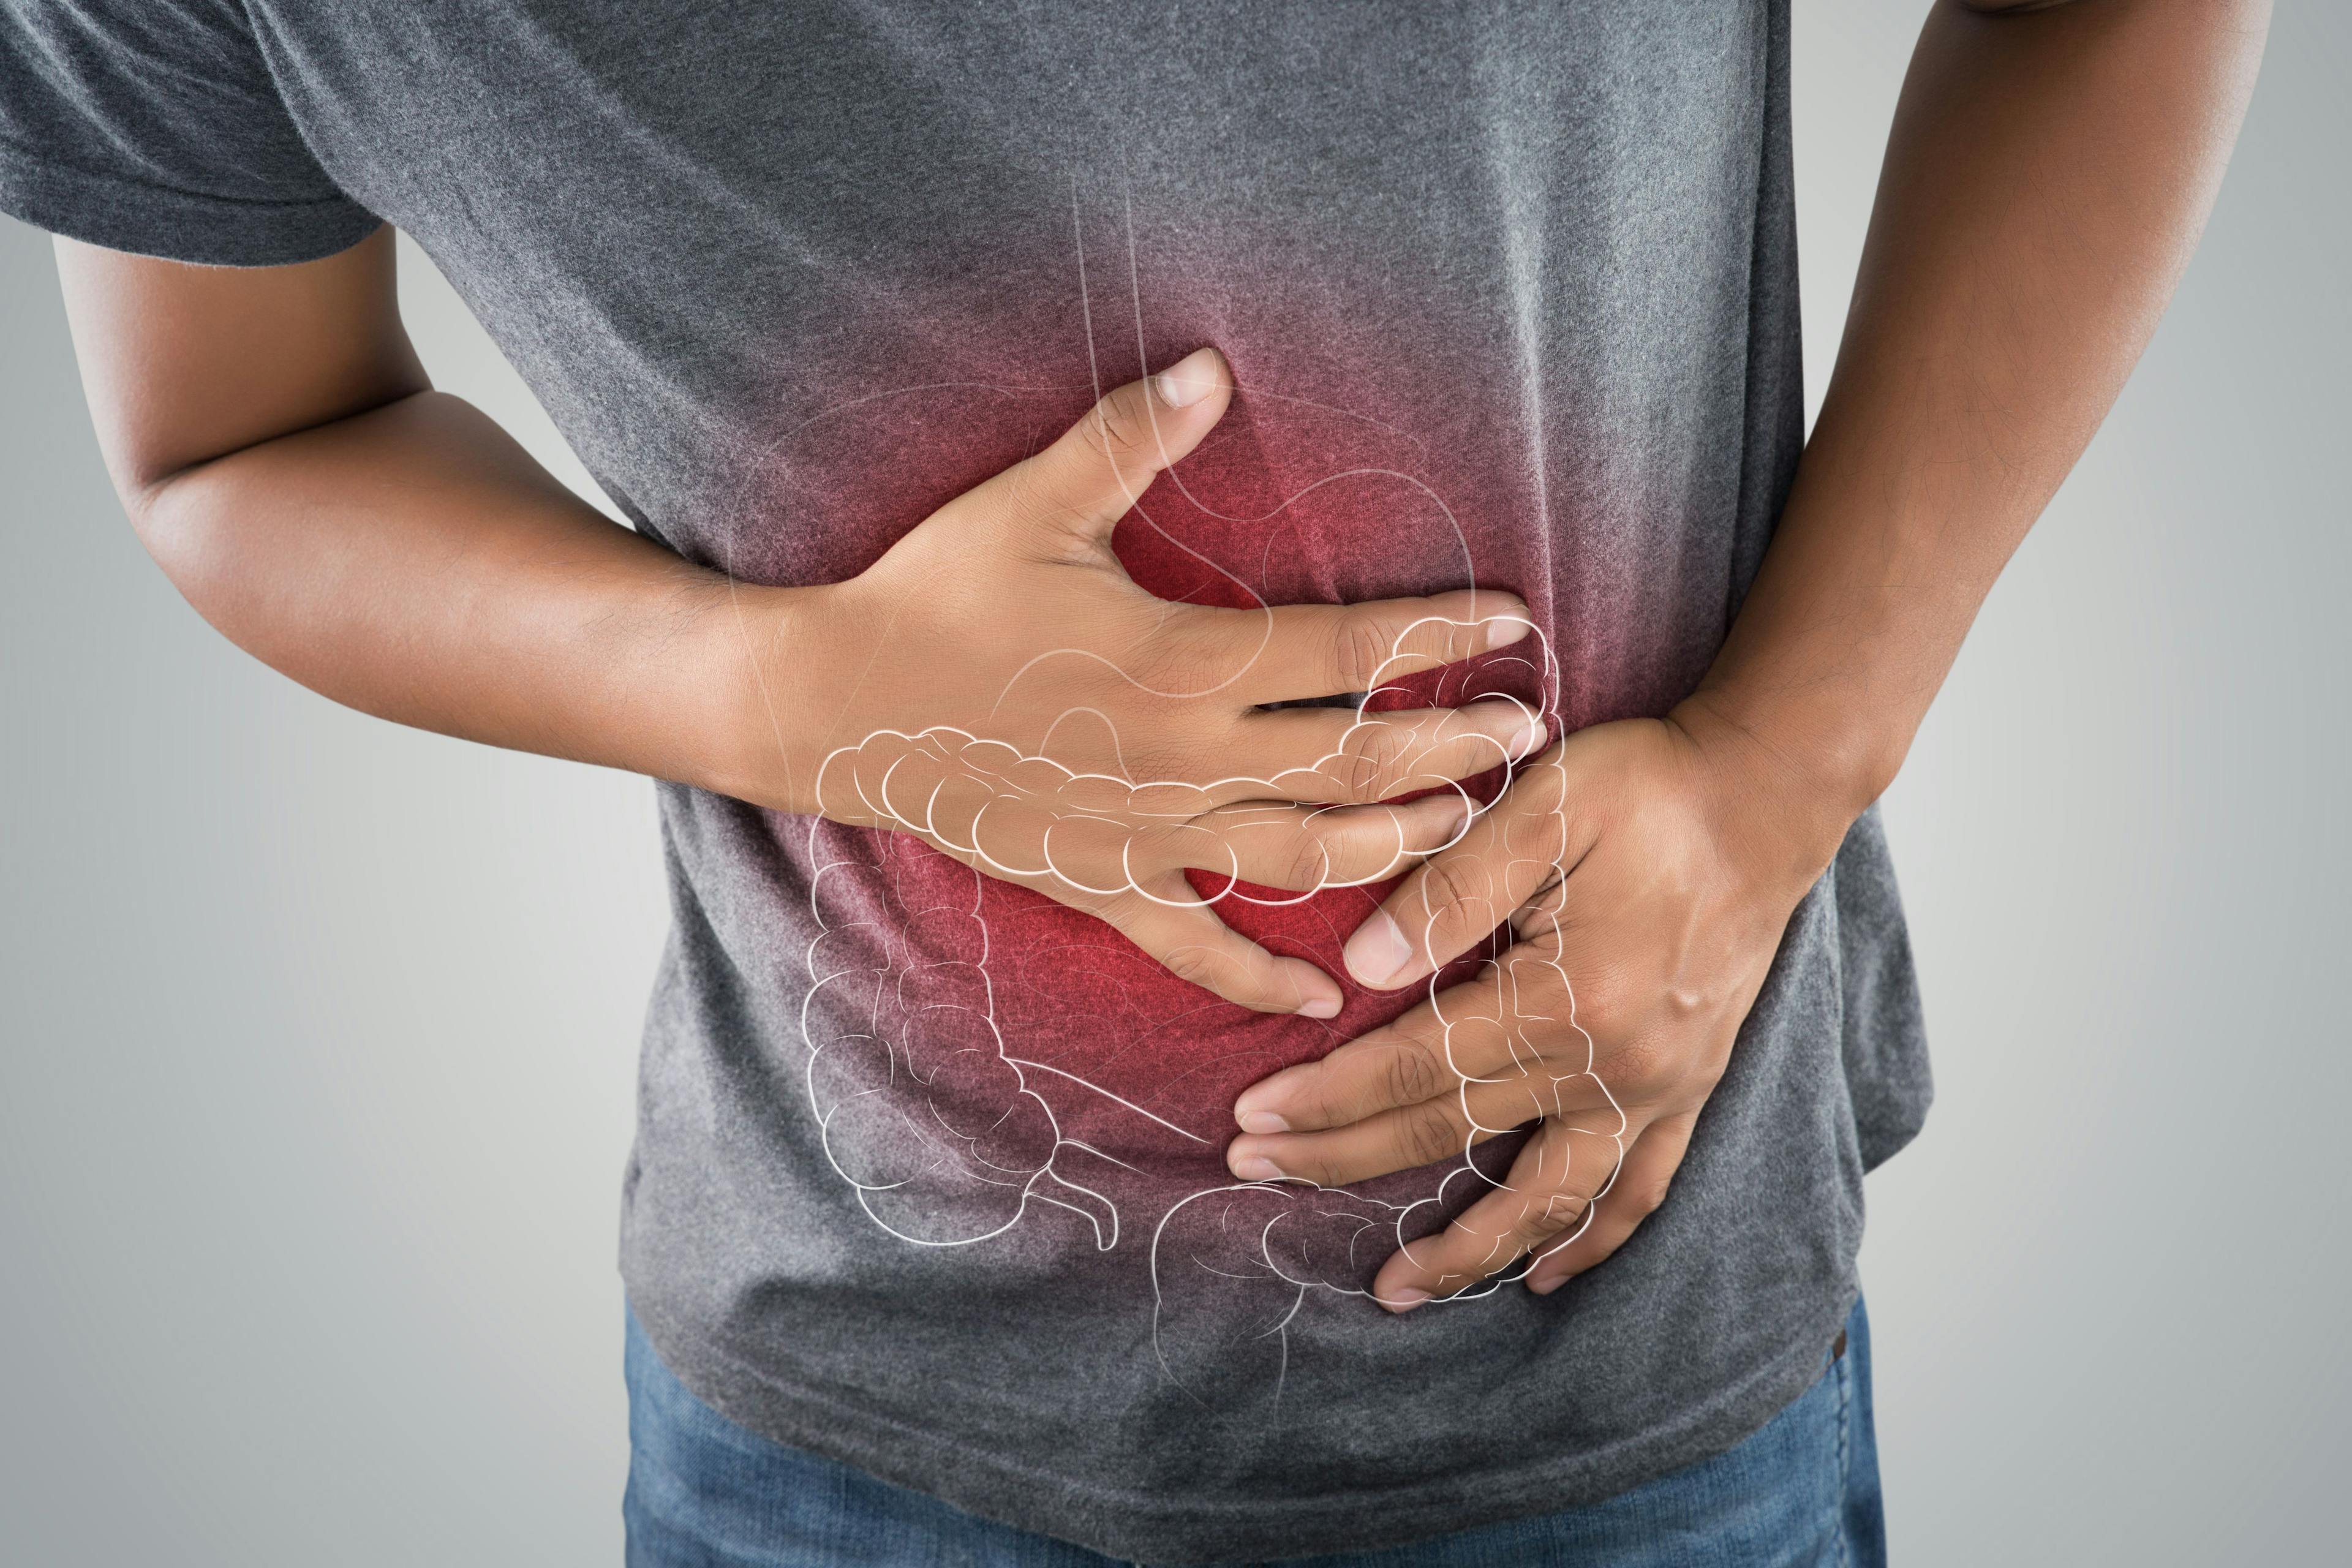 The photo of large intestine is on the man's body against gray background, People With Stomach ache problem concept, Male anatomy | Image Credit: eddows - stock.adobe.com